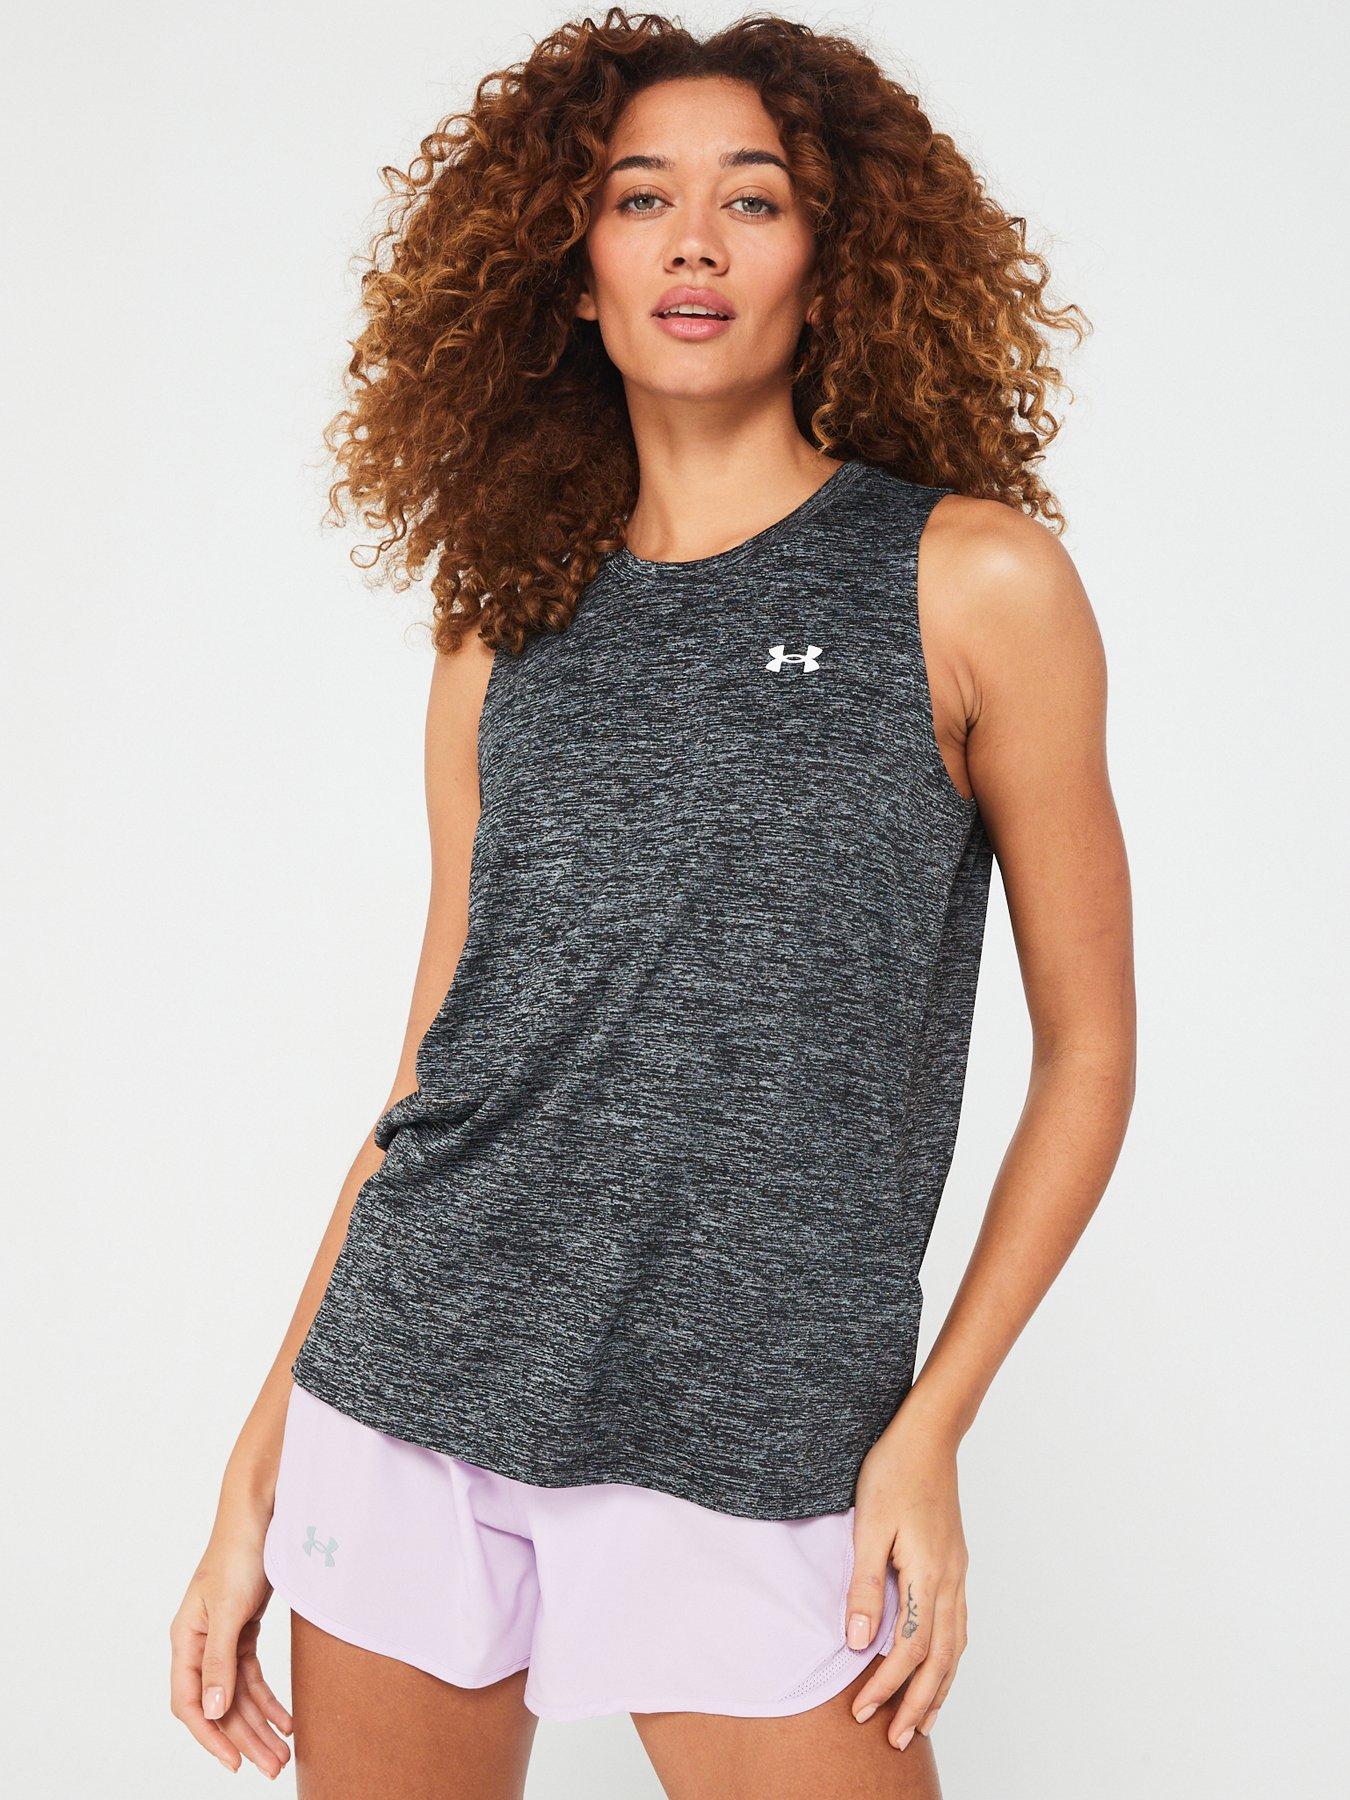  Under Armour Women's Tech Twist Tank Top, (001) Black / /  White, X-Small : Clothing, Shoes & Jewelry